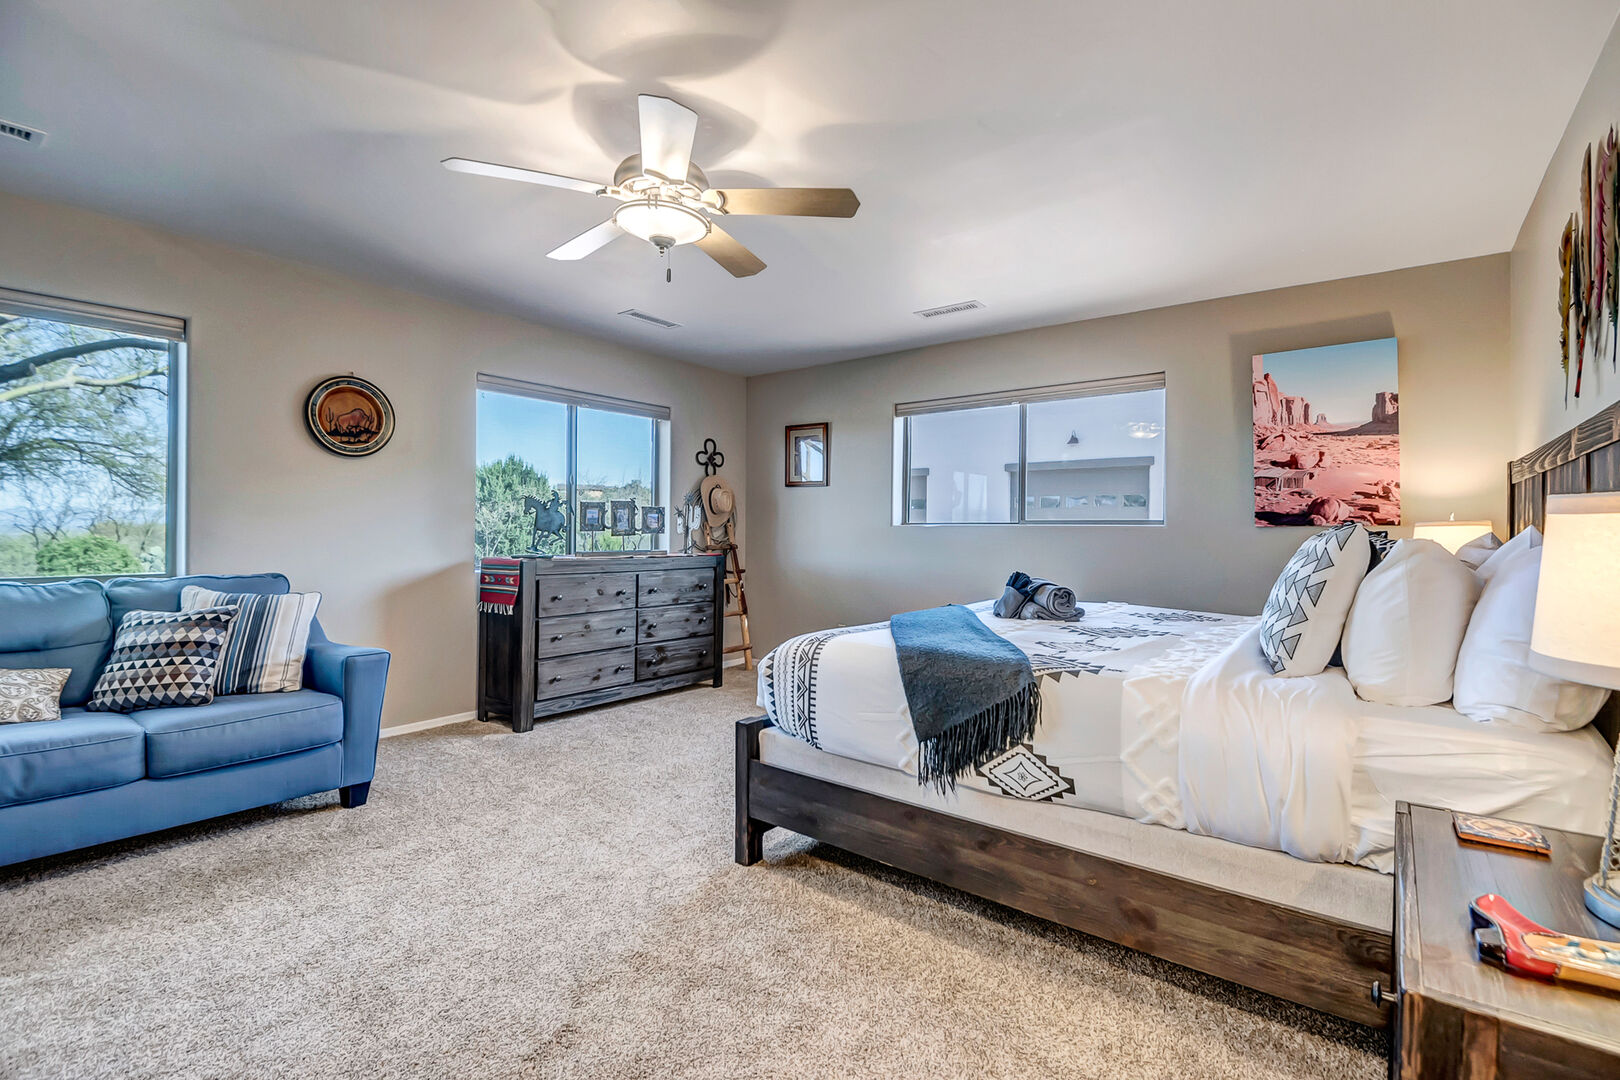 Bedroom 3 with queen bed, queen-size sleeper sofa, 60” smart TV, walk-in
closet and access to full shared bathroom